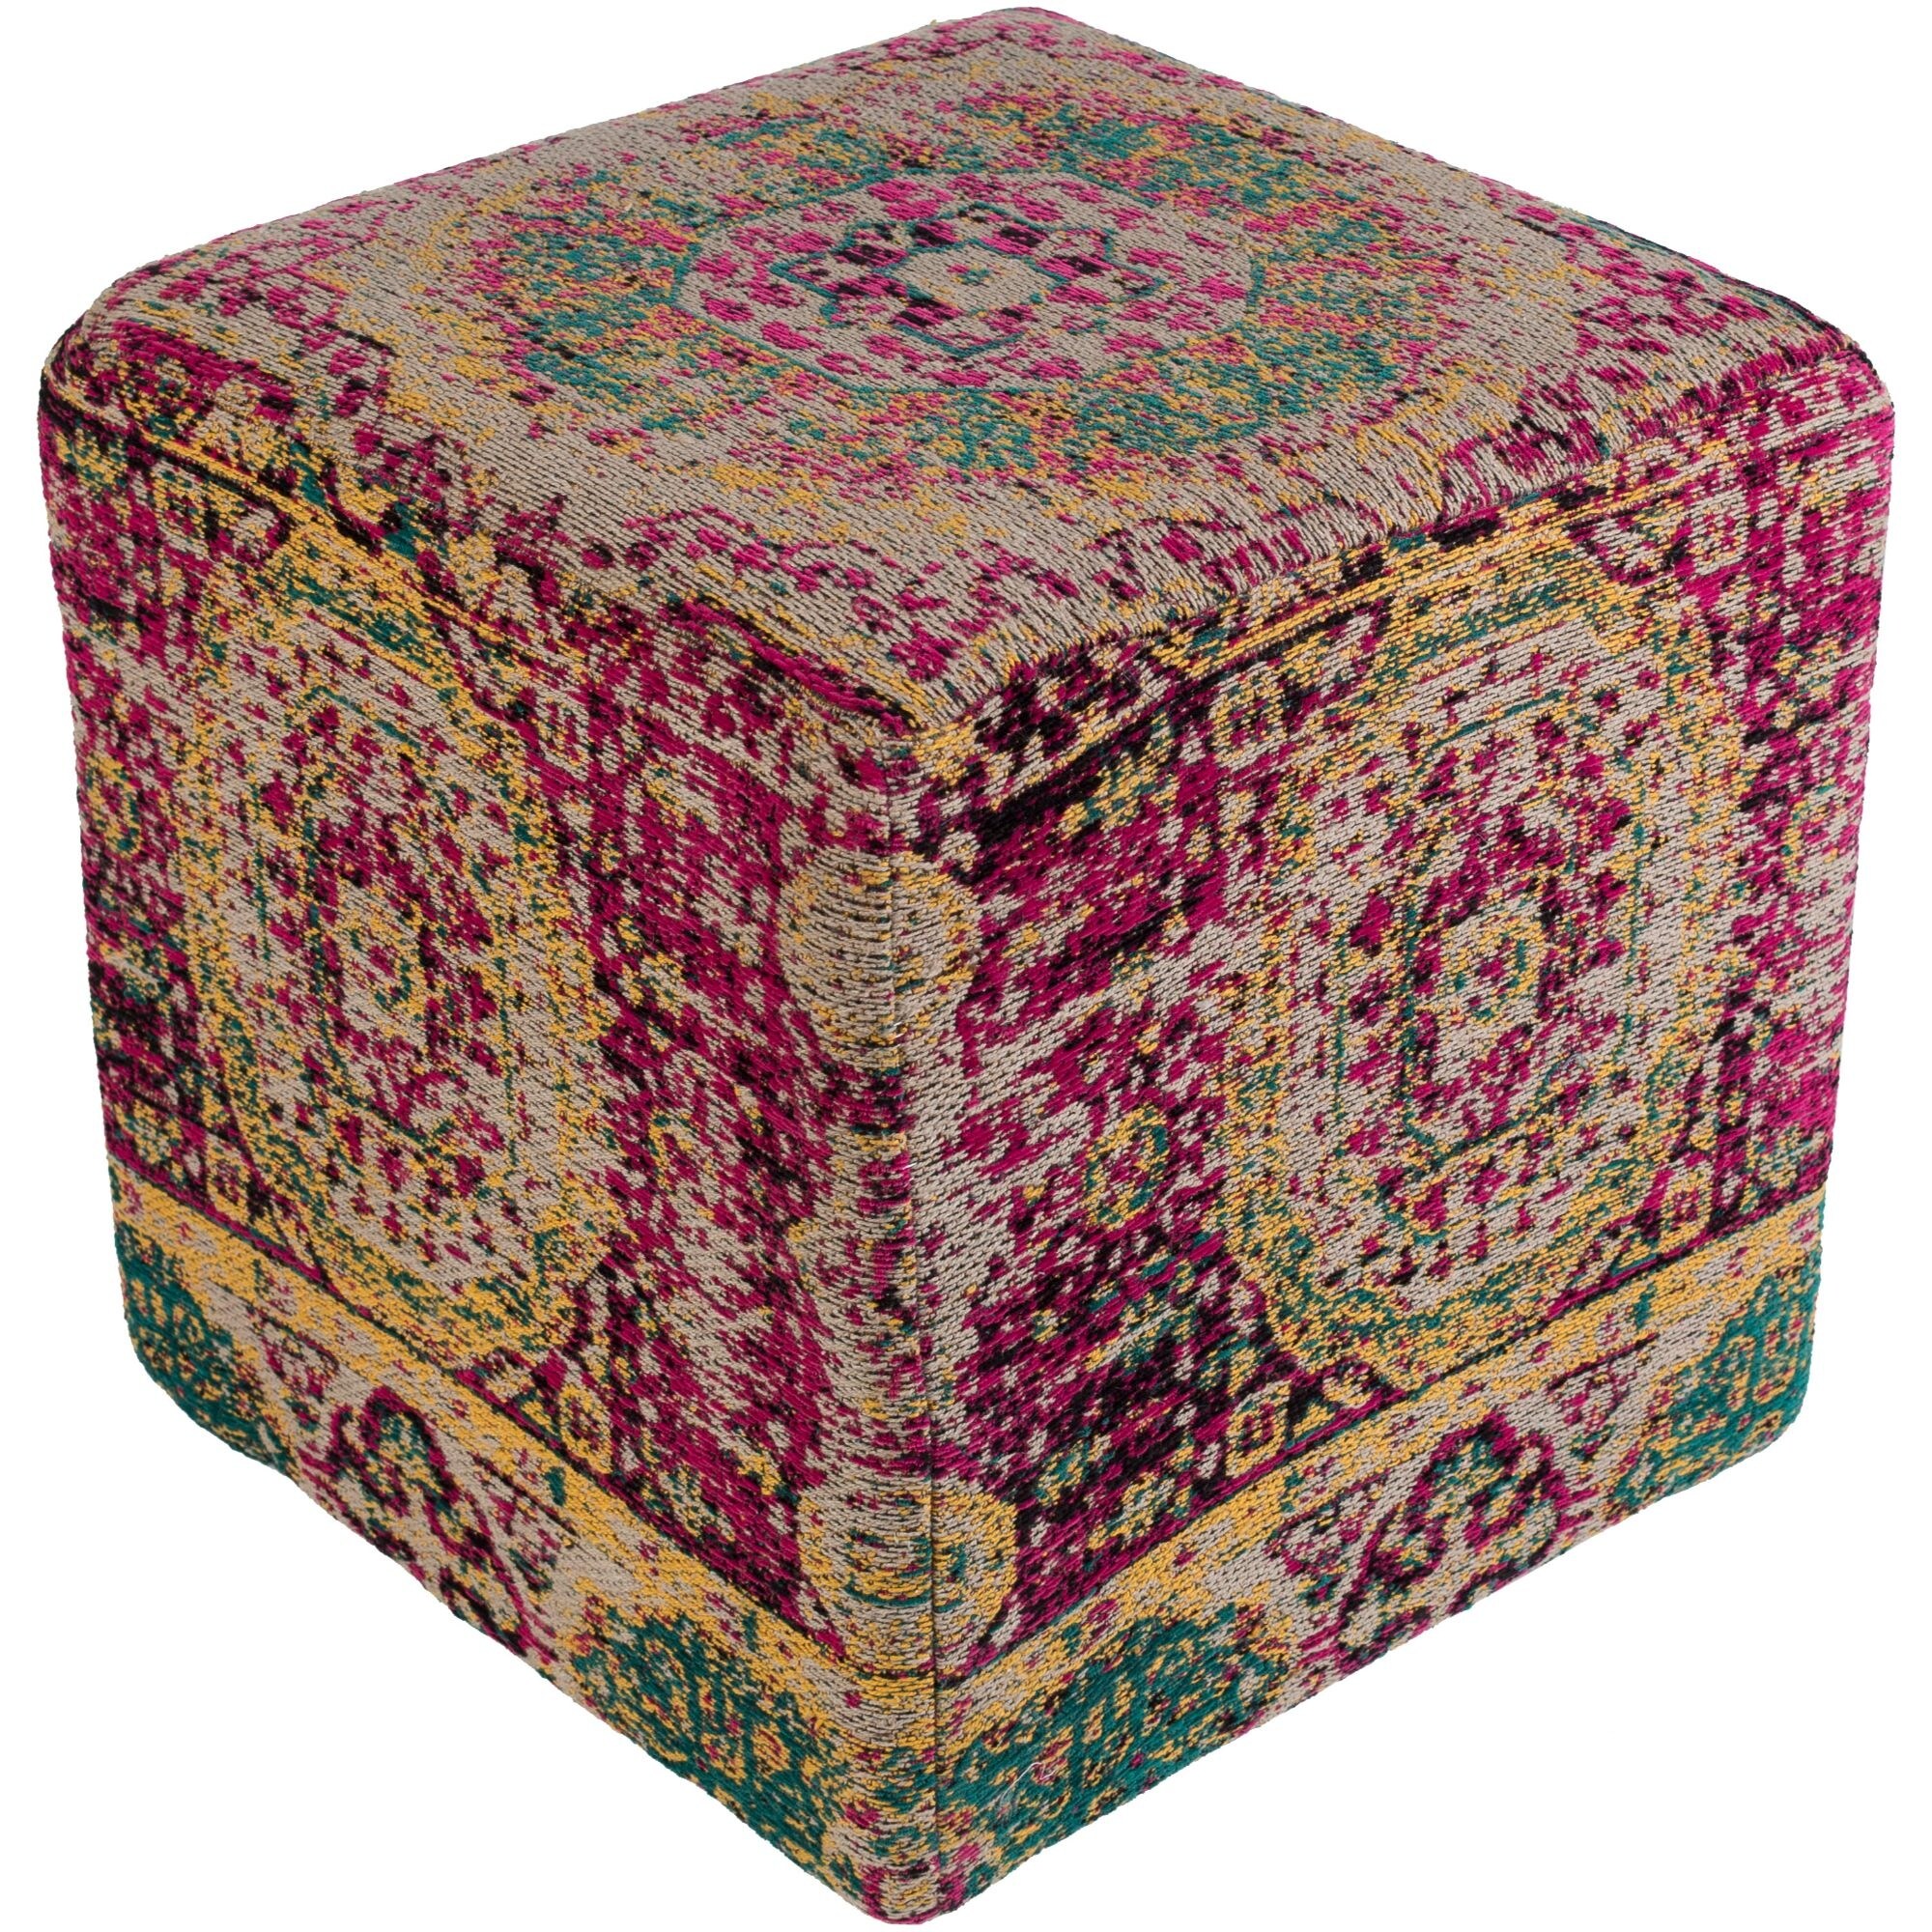 18" Pink and Green Distressed Finish Cubic Pouf Ottoman